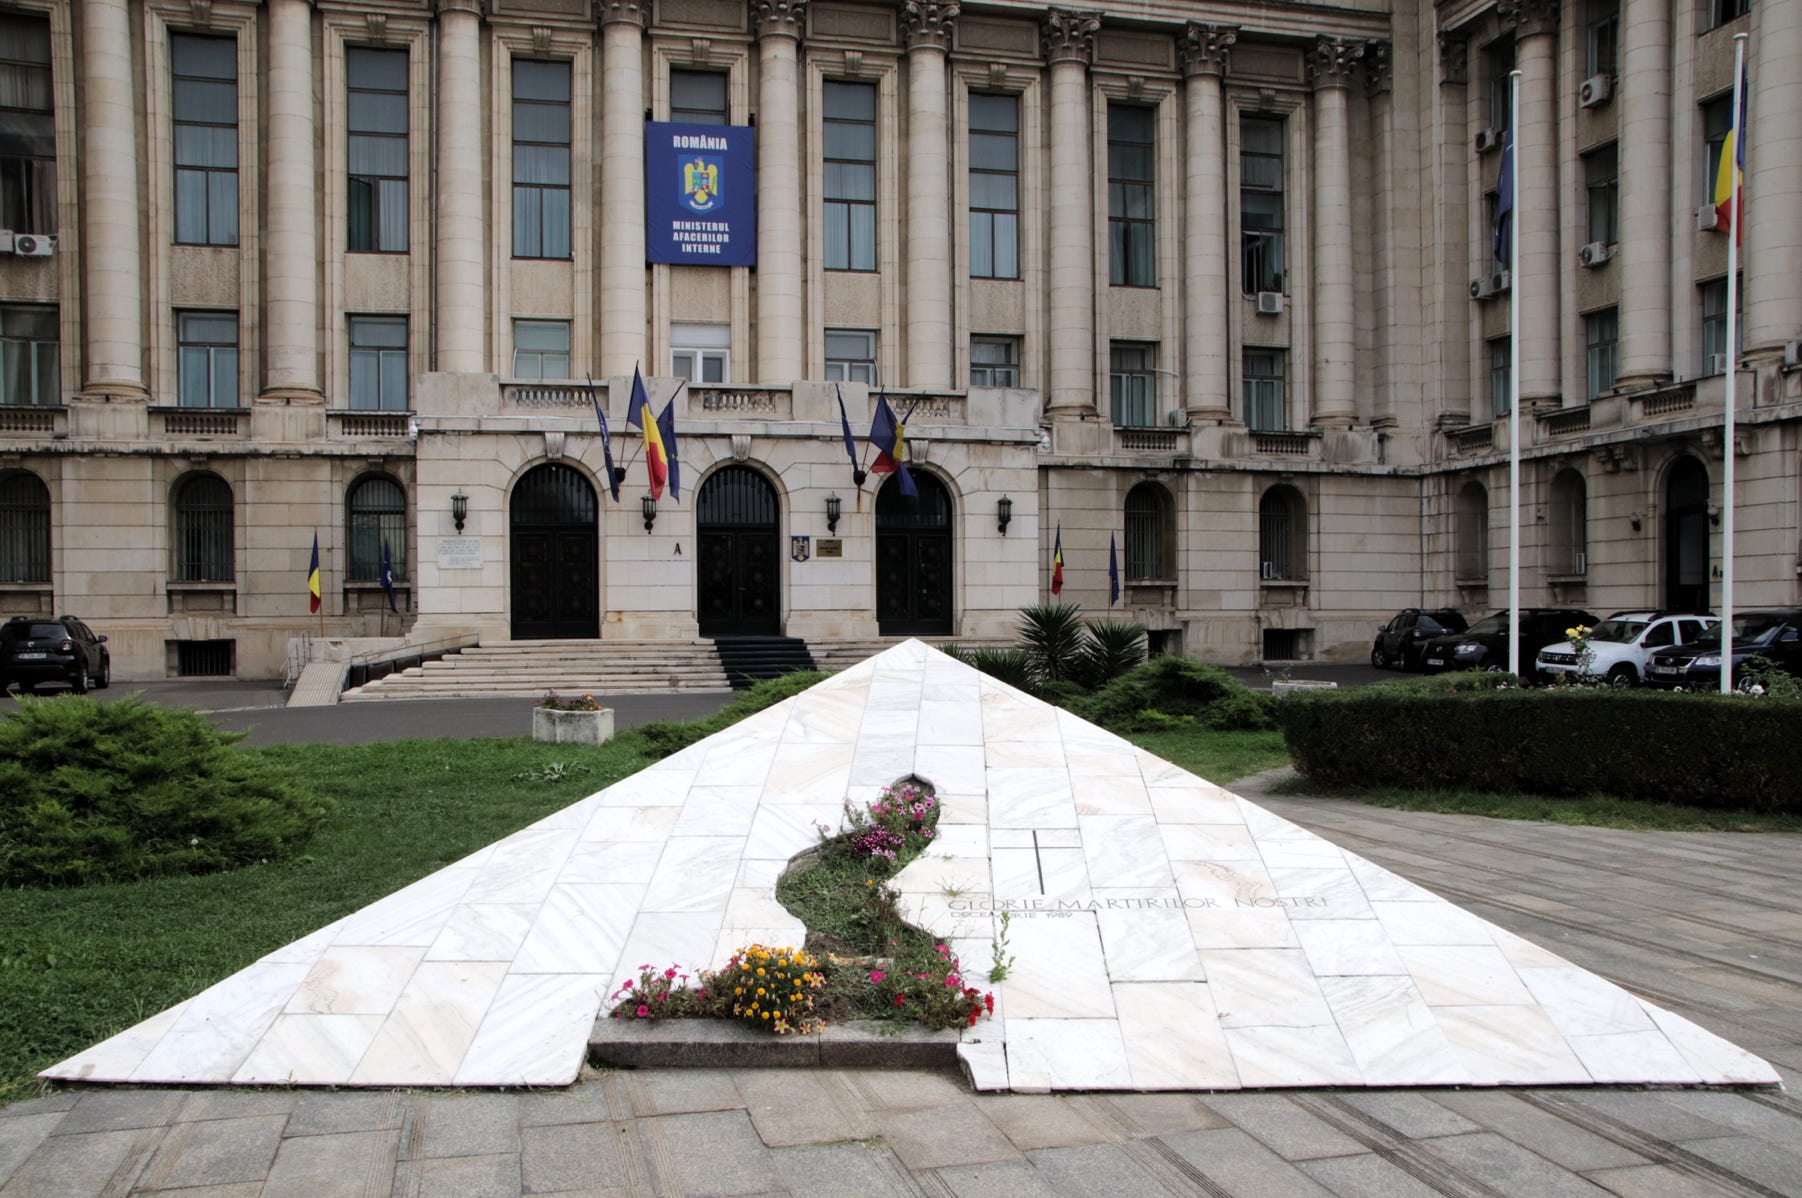 The building where Ceauşescu delivered his final speech.  The white pyramid now serves as a memorial, pointing upwards to the balcony where Nicolae Ceaușescu delivered his final address on 21st December 1989.  The pyramid is inscribed “Glorie martirilor nostril”, which means “Glory to our martyrs” as a memorial to the 49 people killed and 500 wounded there on that day. 